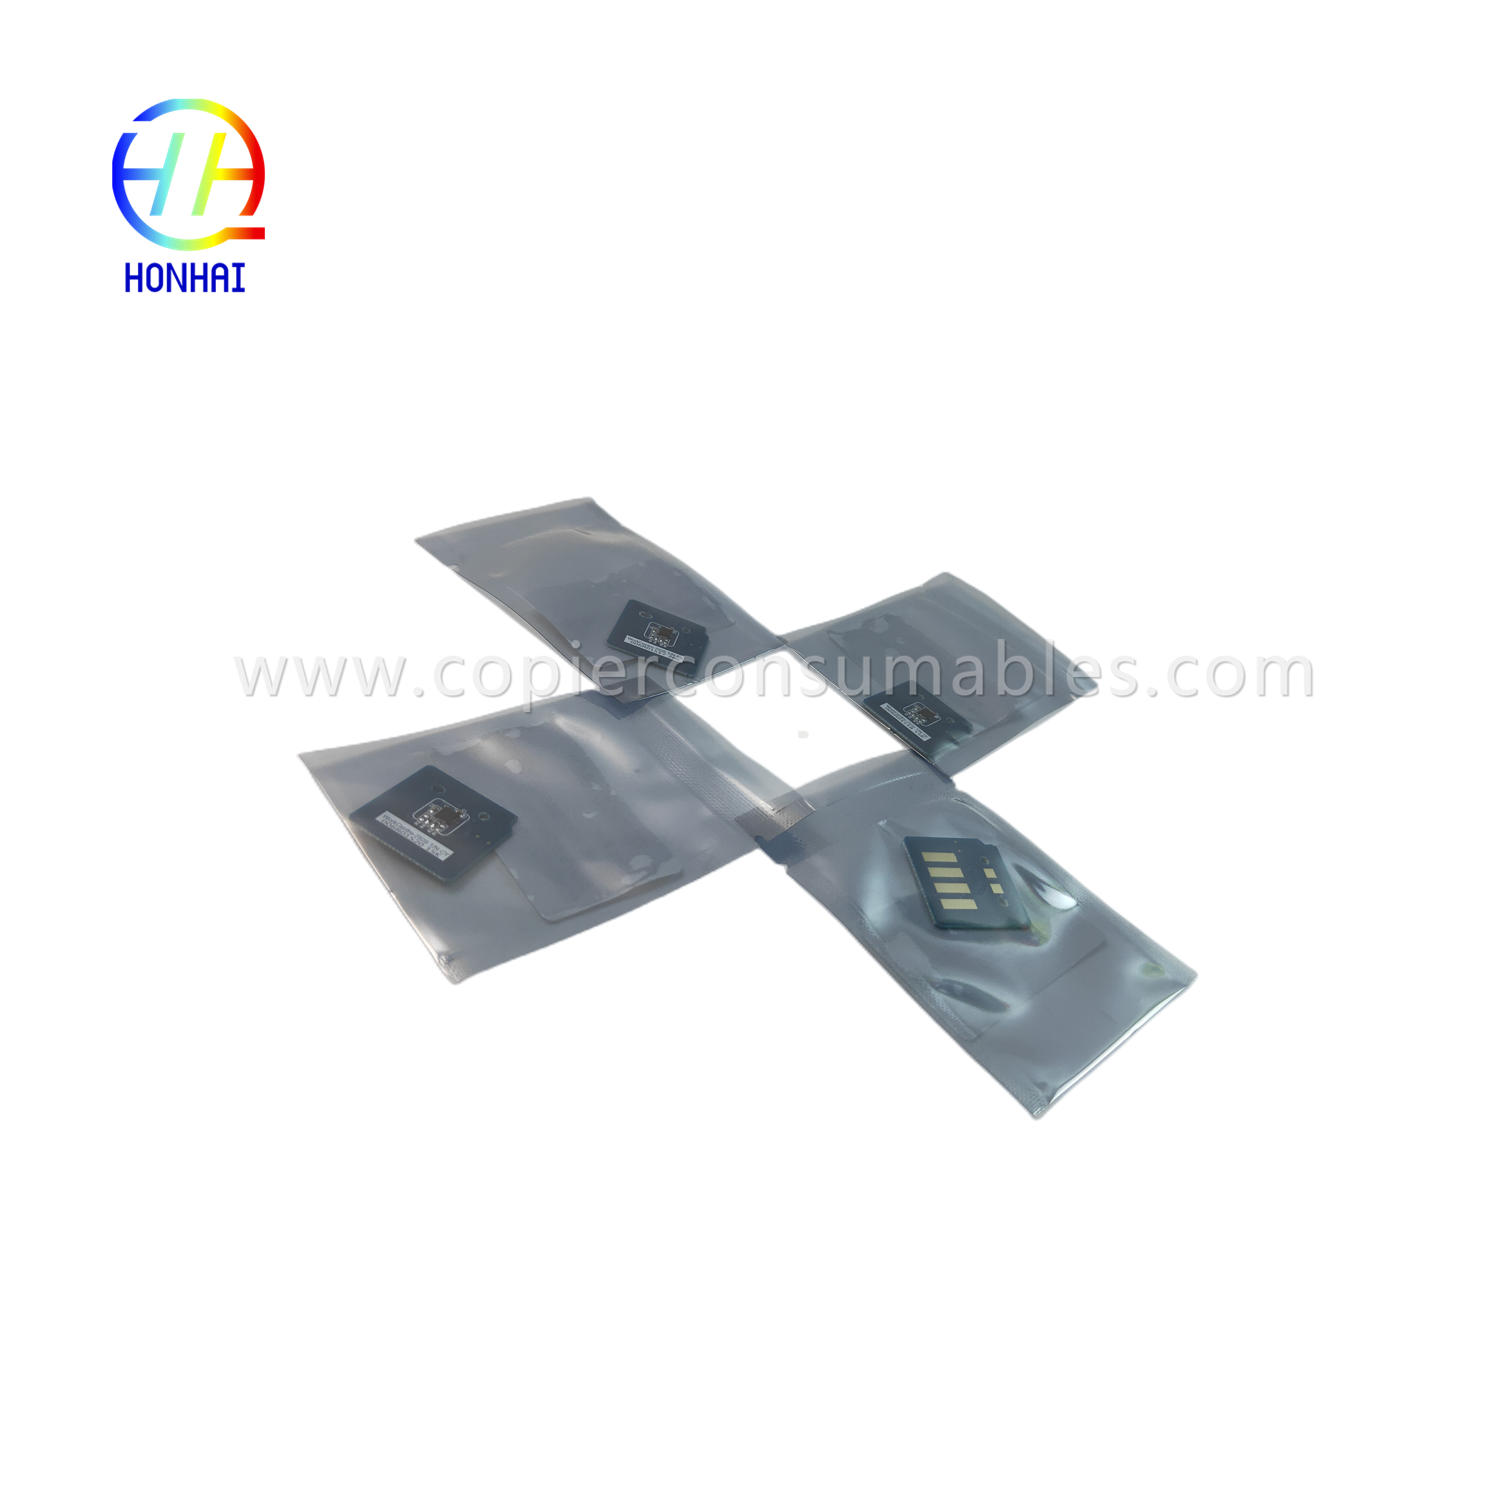 Toner Chip (set) for Xerox 7525 7530 7535 7830 7835 7845 7855 006R01517 006R01518 006R01519 006R01520 Chip  (6)_副本